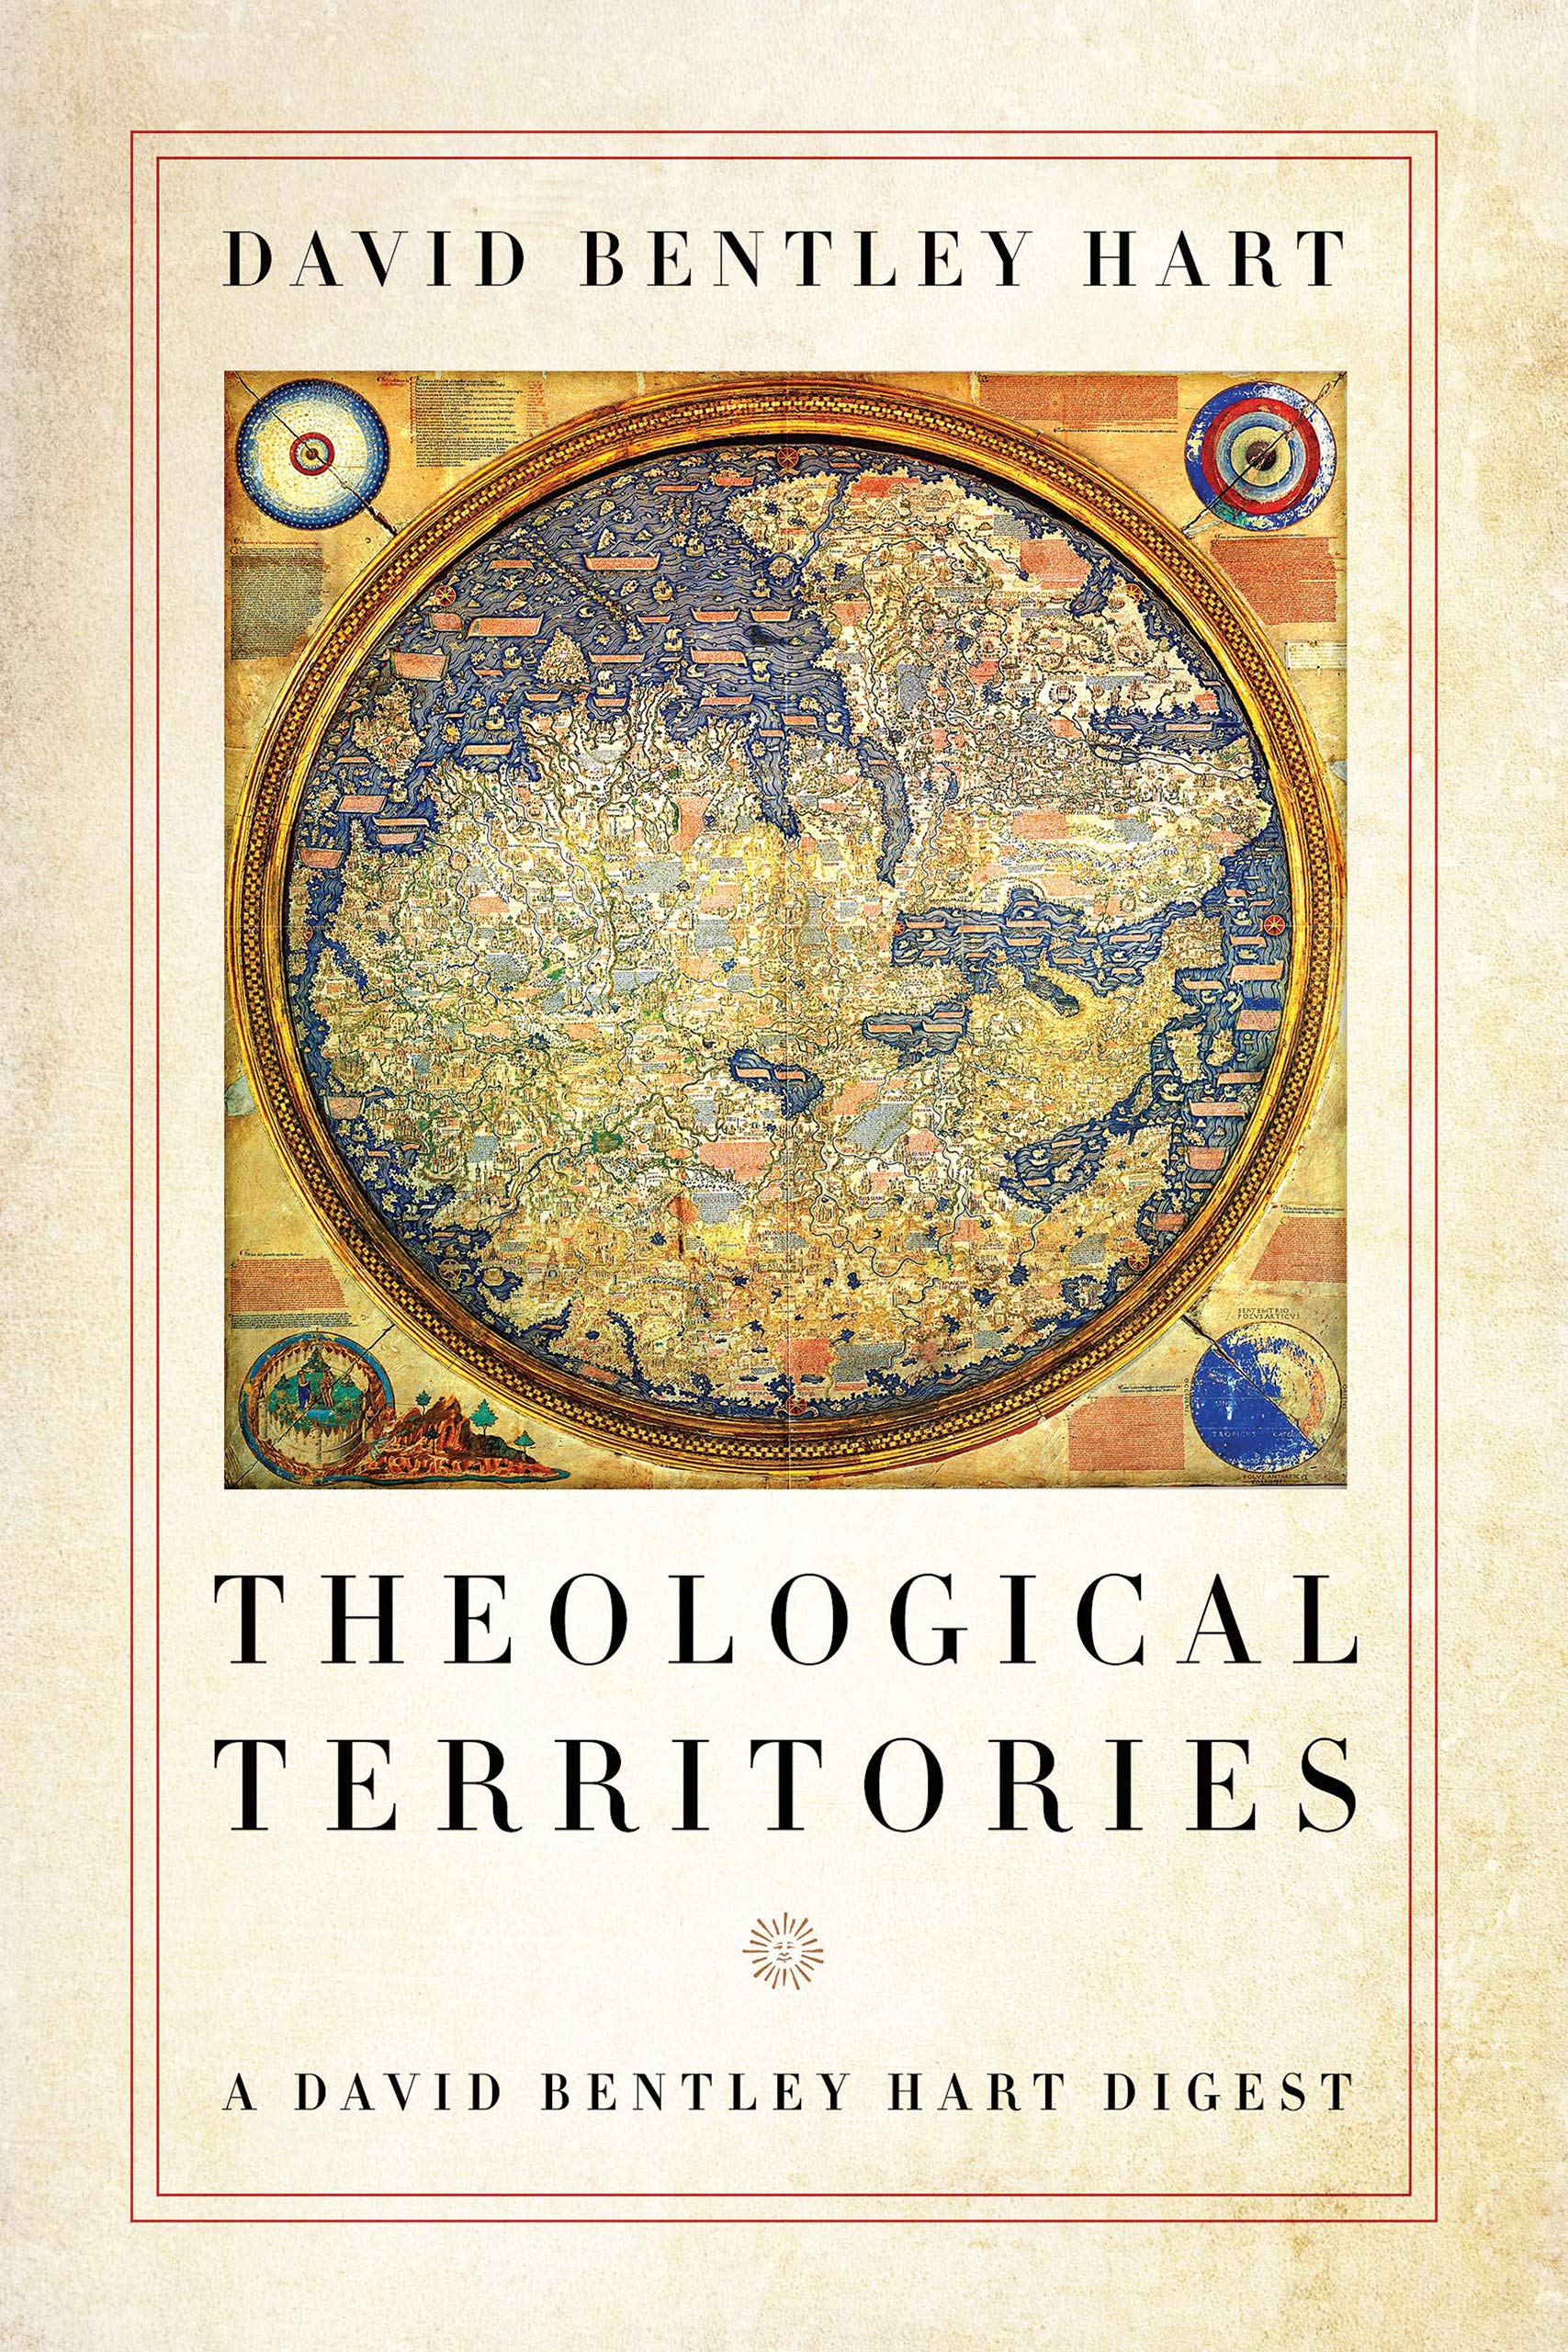 The cover of THEOLOGICAL TERRITORIES: A DAVID BENTLEY HART DIGEST